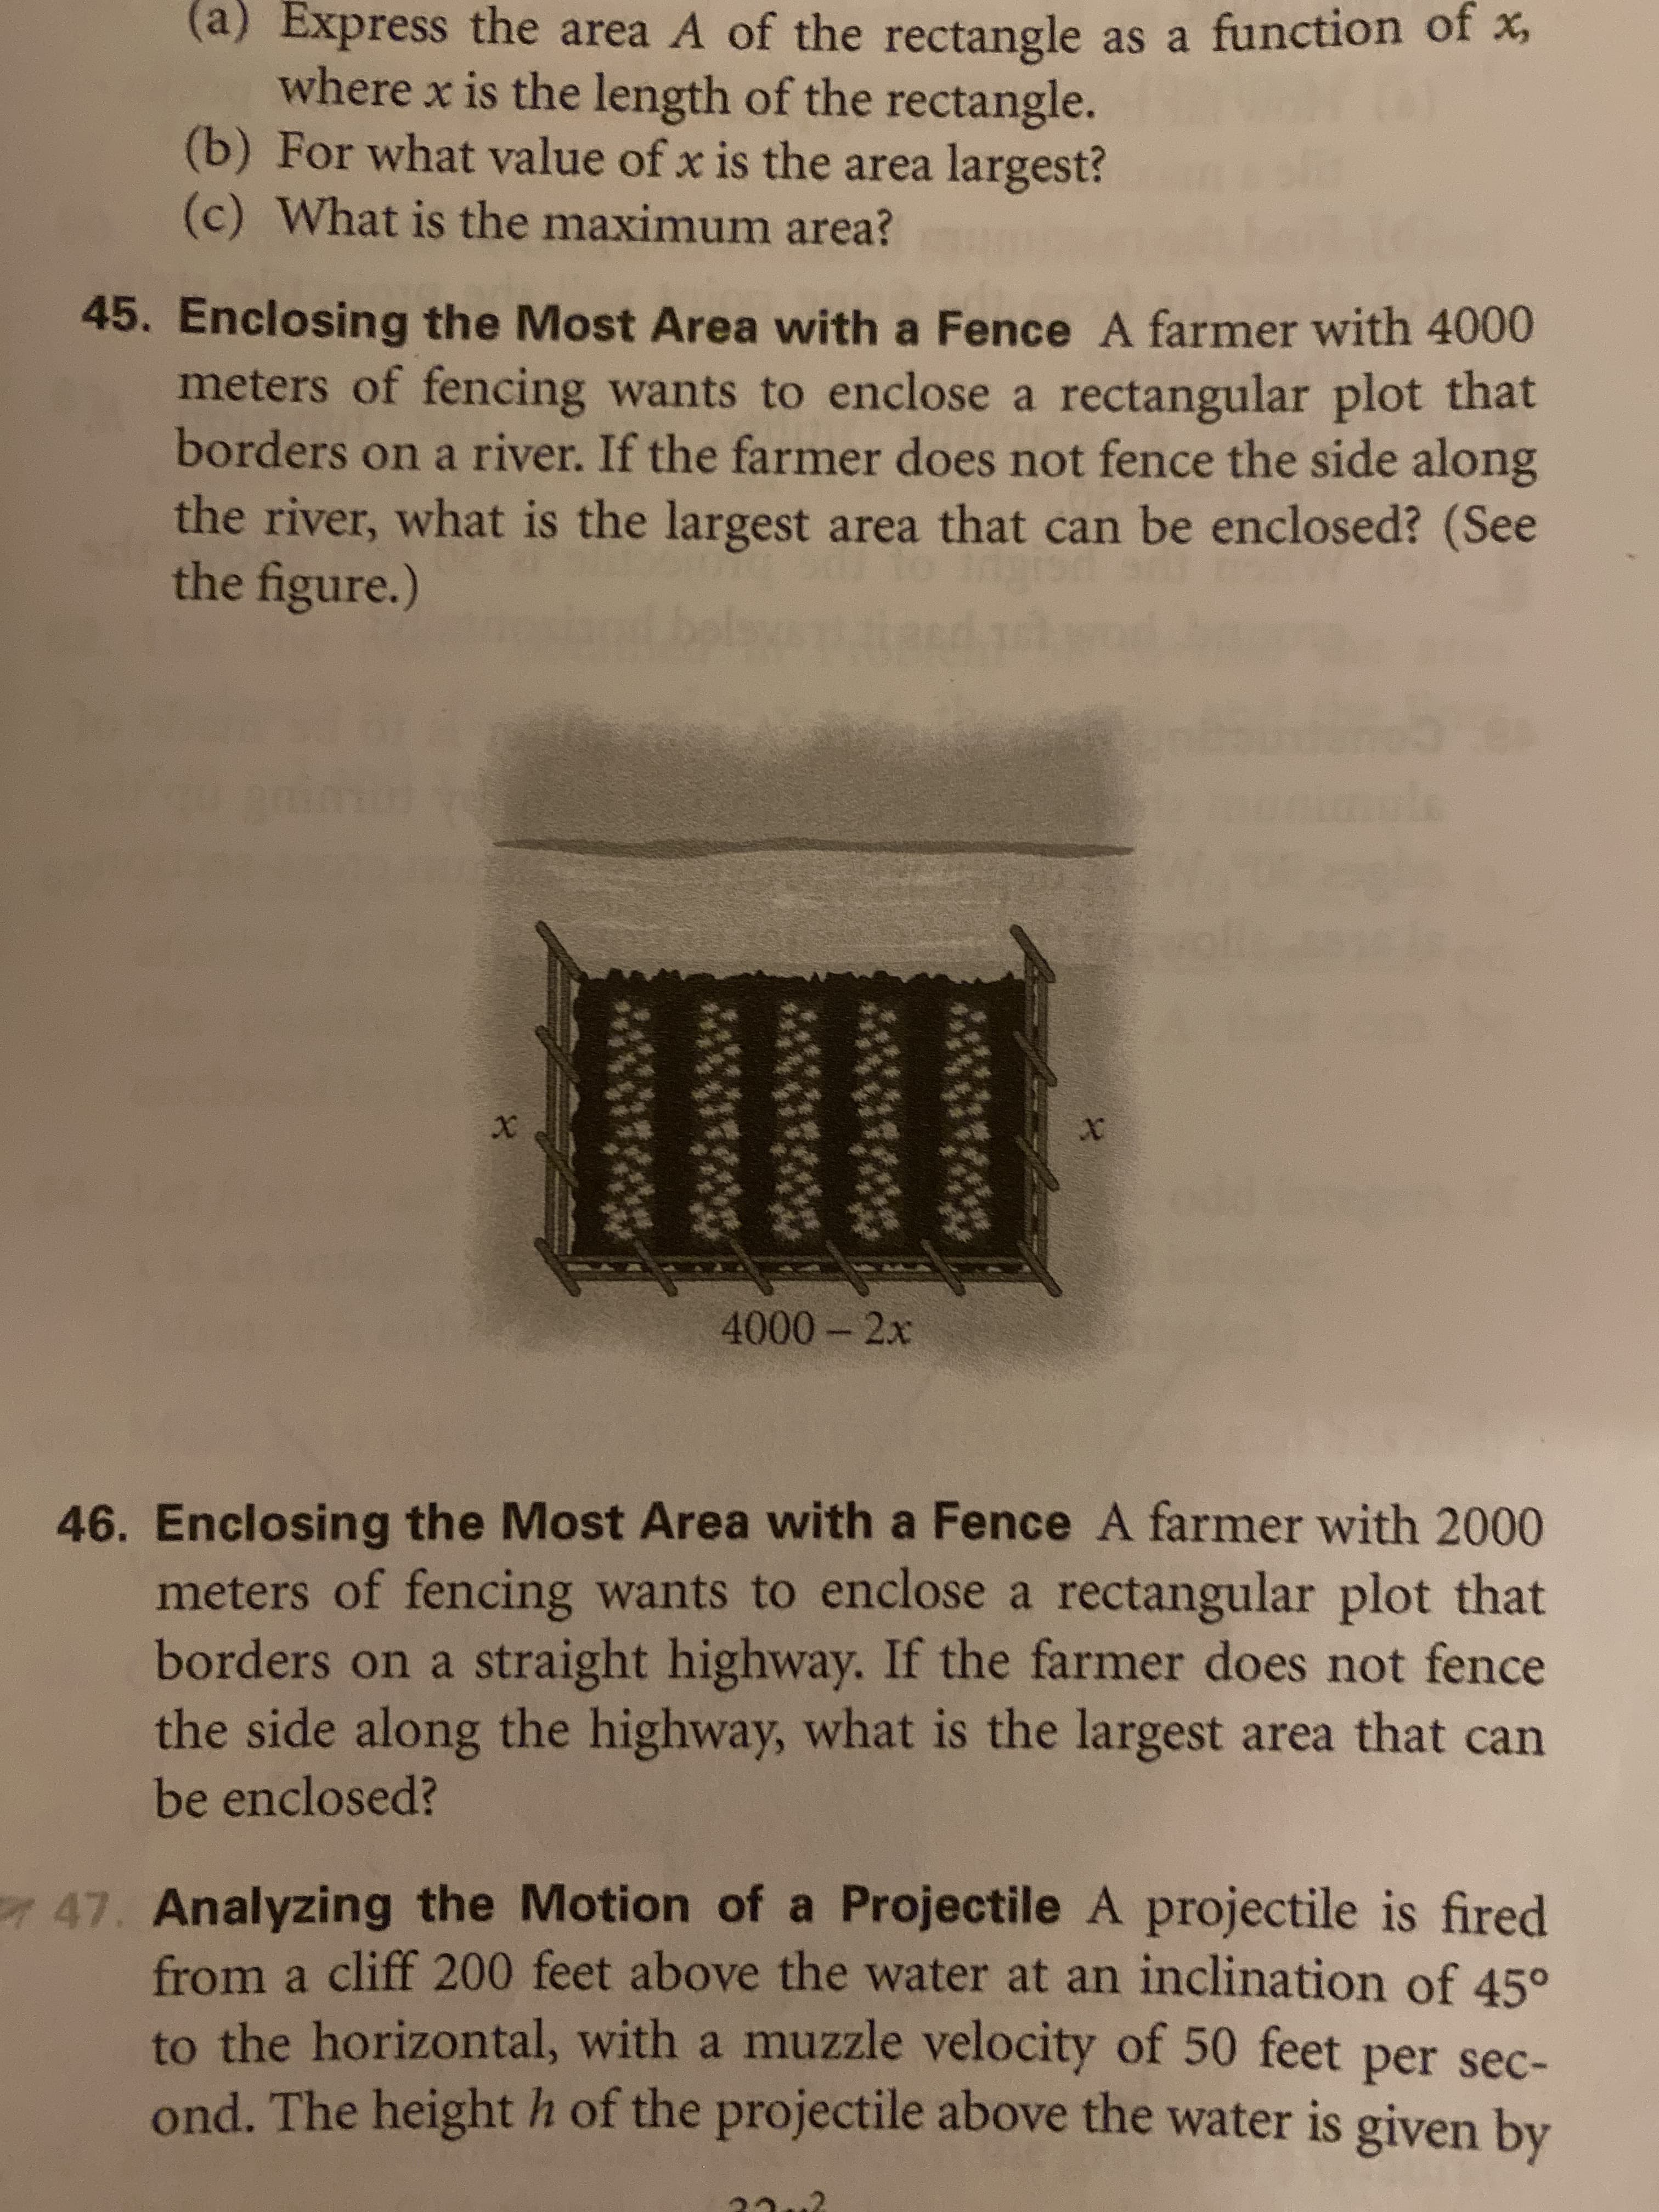 (a) Express the area A of the rectangle as a function of
where x is the length of the rectangle.
(b) For what value of x is the area largest?
(c) What is the maximum area?
45. Enclosing the Most Area with a Fence A farmer with 4000
meters of fencing wants to enclose a rectangular plot that
borders on a river. If the farmer does not fence the side along
the river, what is the largest area that can be enclosed? (See
the figure.)
et belaw
d dd
48
X
XX
4000-2x
46. Enclosing the Most Area with a Fence A farmer with 2000
meters of fencing wants to enclose a rectangular plot that
borders on a straight highway. If the farmer does not fence
the side along the highway, what is the largest area that can
be enclosed?
47. Analyzing the Motion of a Projectile A projectile is fired
from a cliff 200 feet above the water at an inclination of 45°
to the horizontal, with a muzzle velocity of 50 feet per sec-
ond. The height h of the projectile above the water is given by
